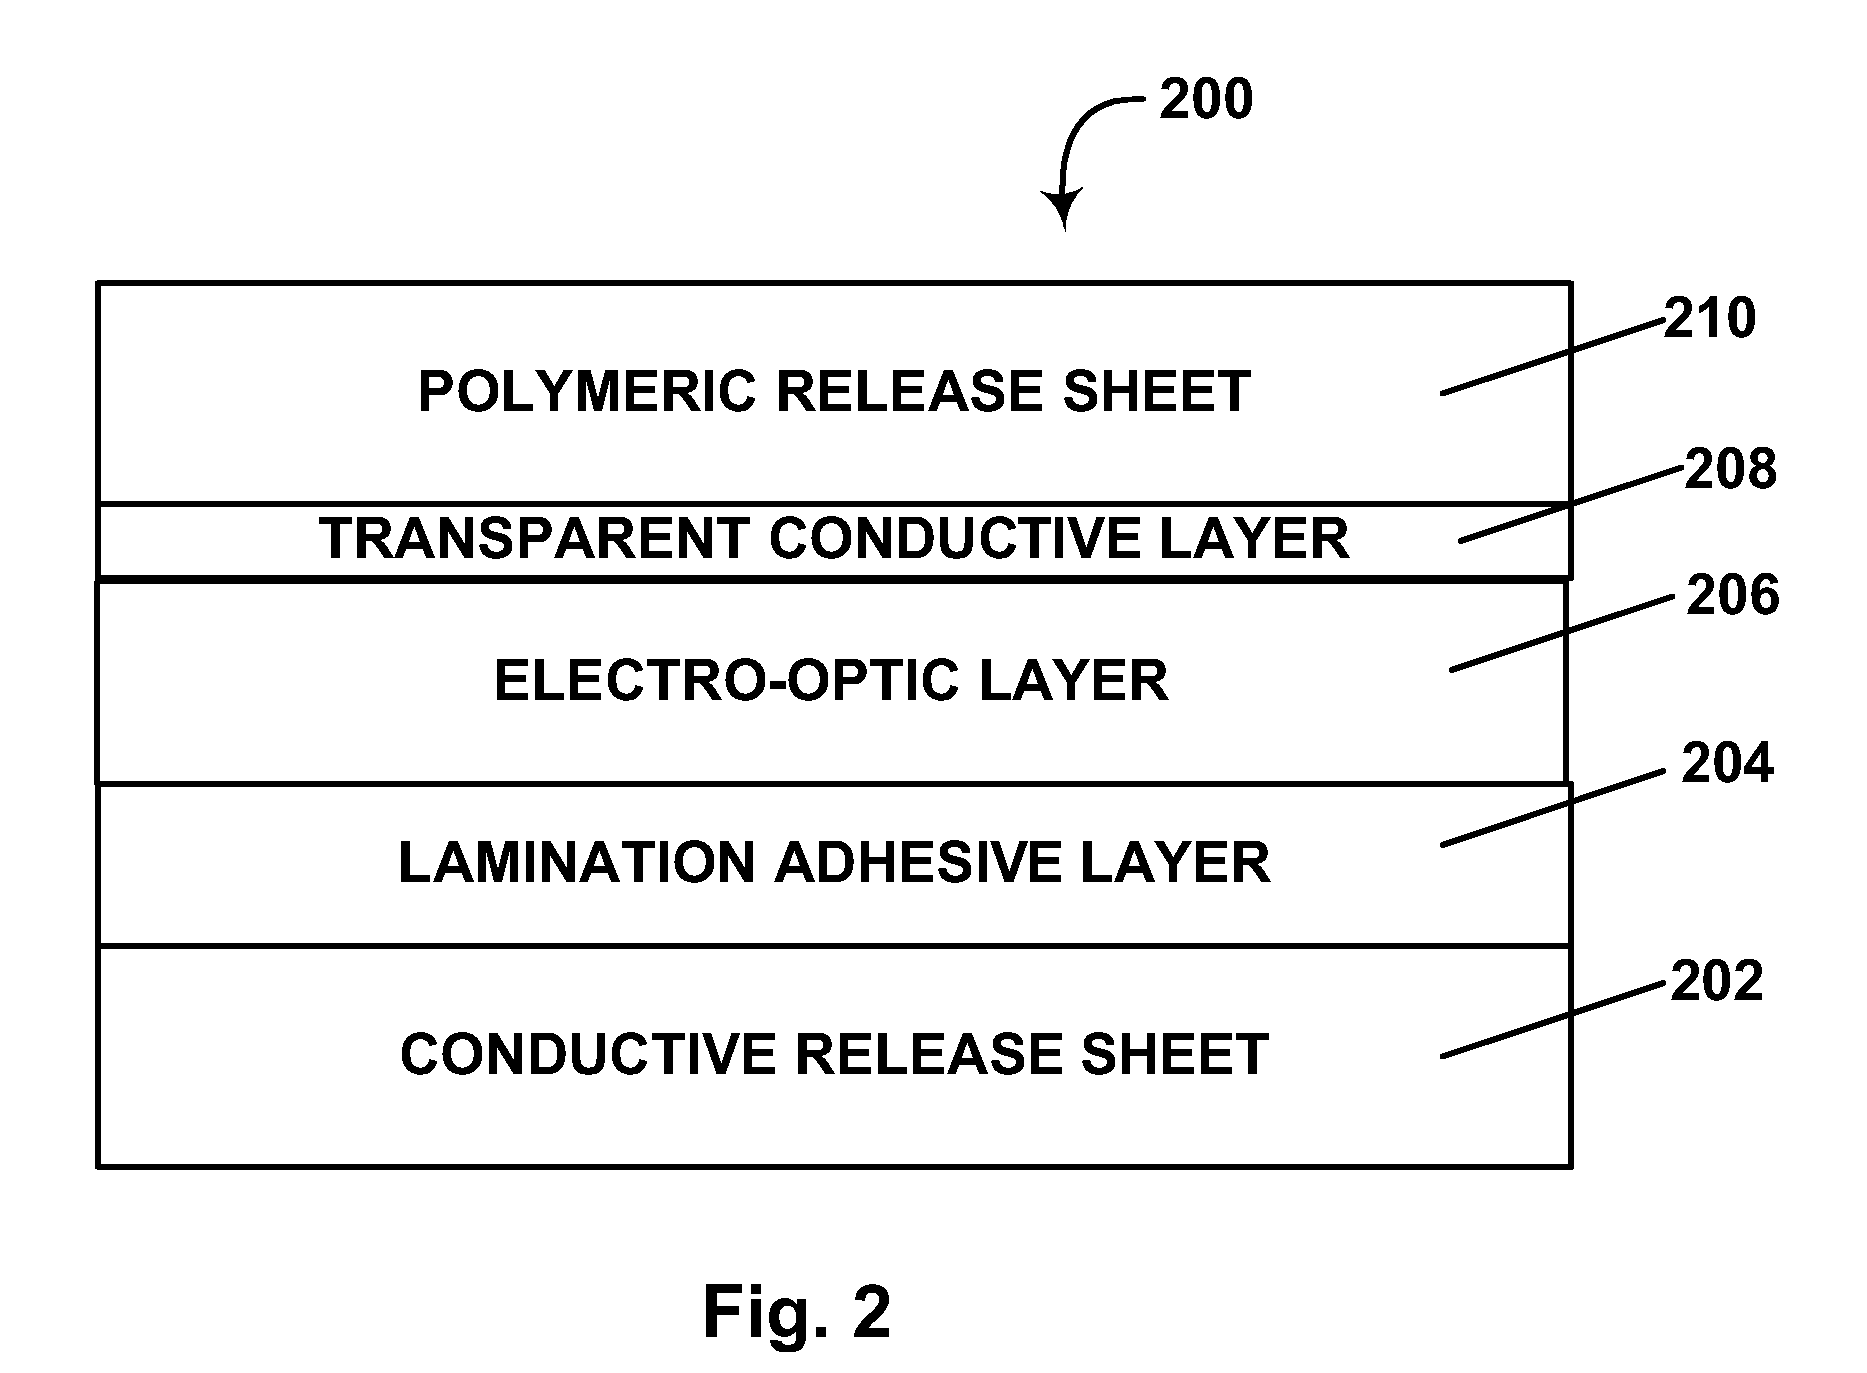 Components and testing methods for use in the production of electro-optic displays